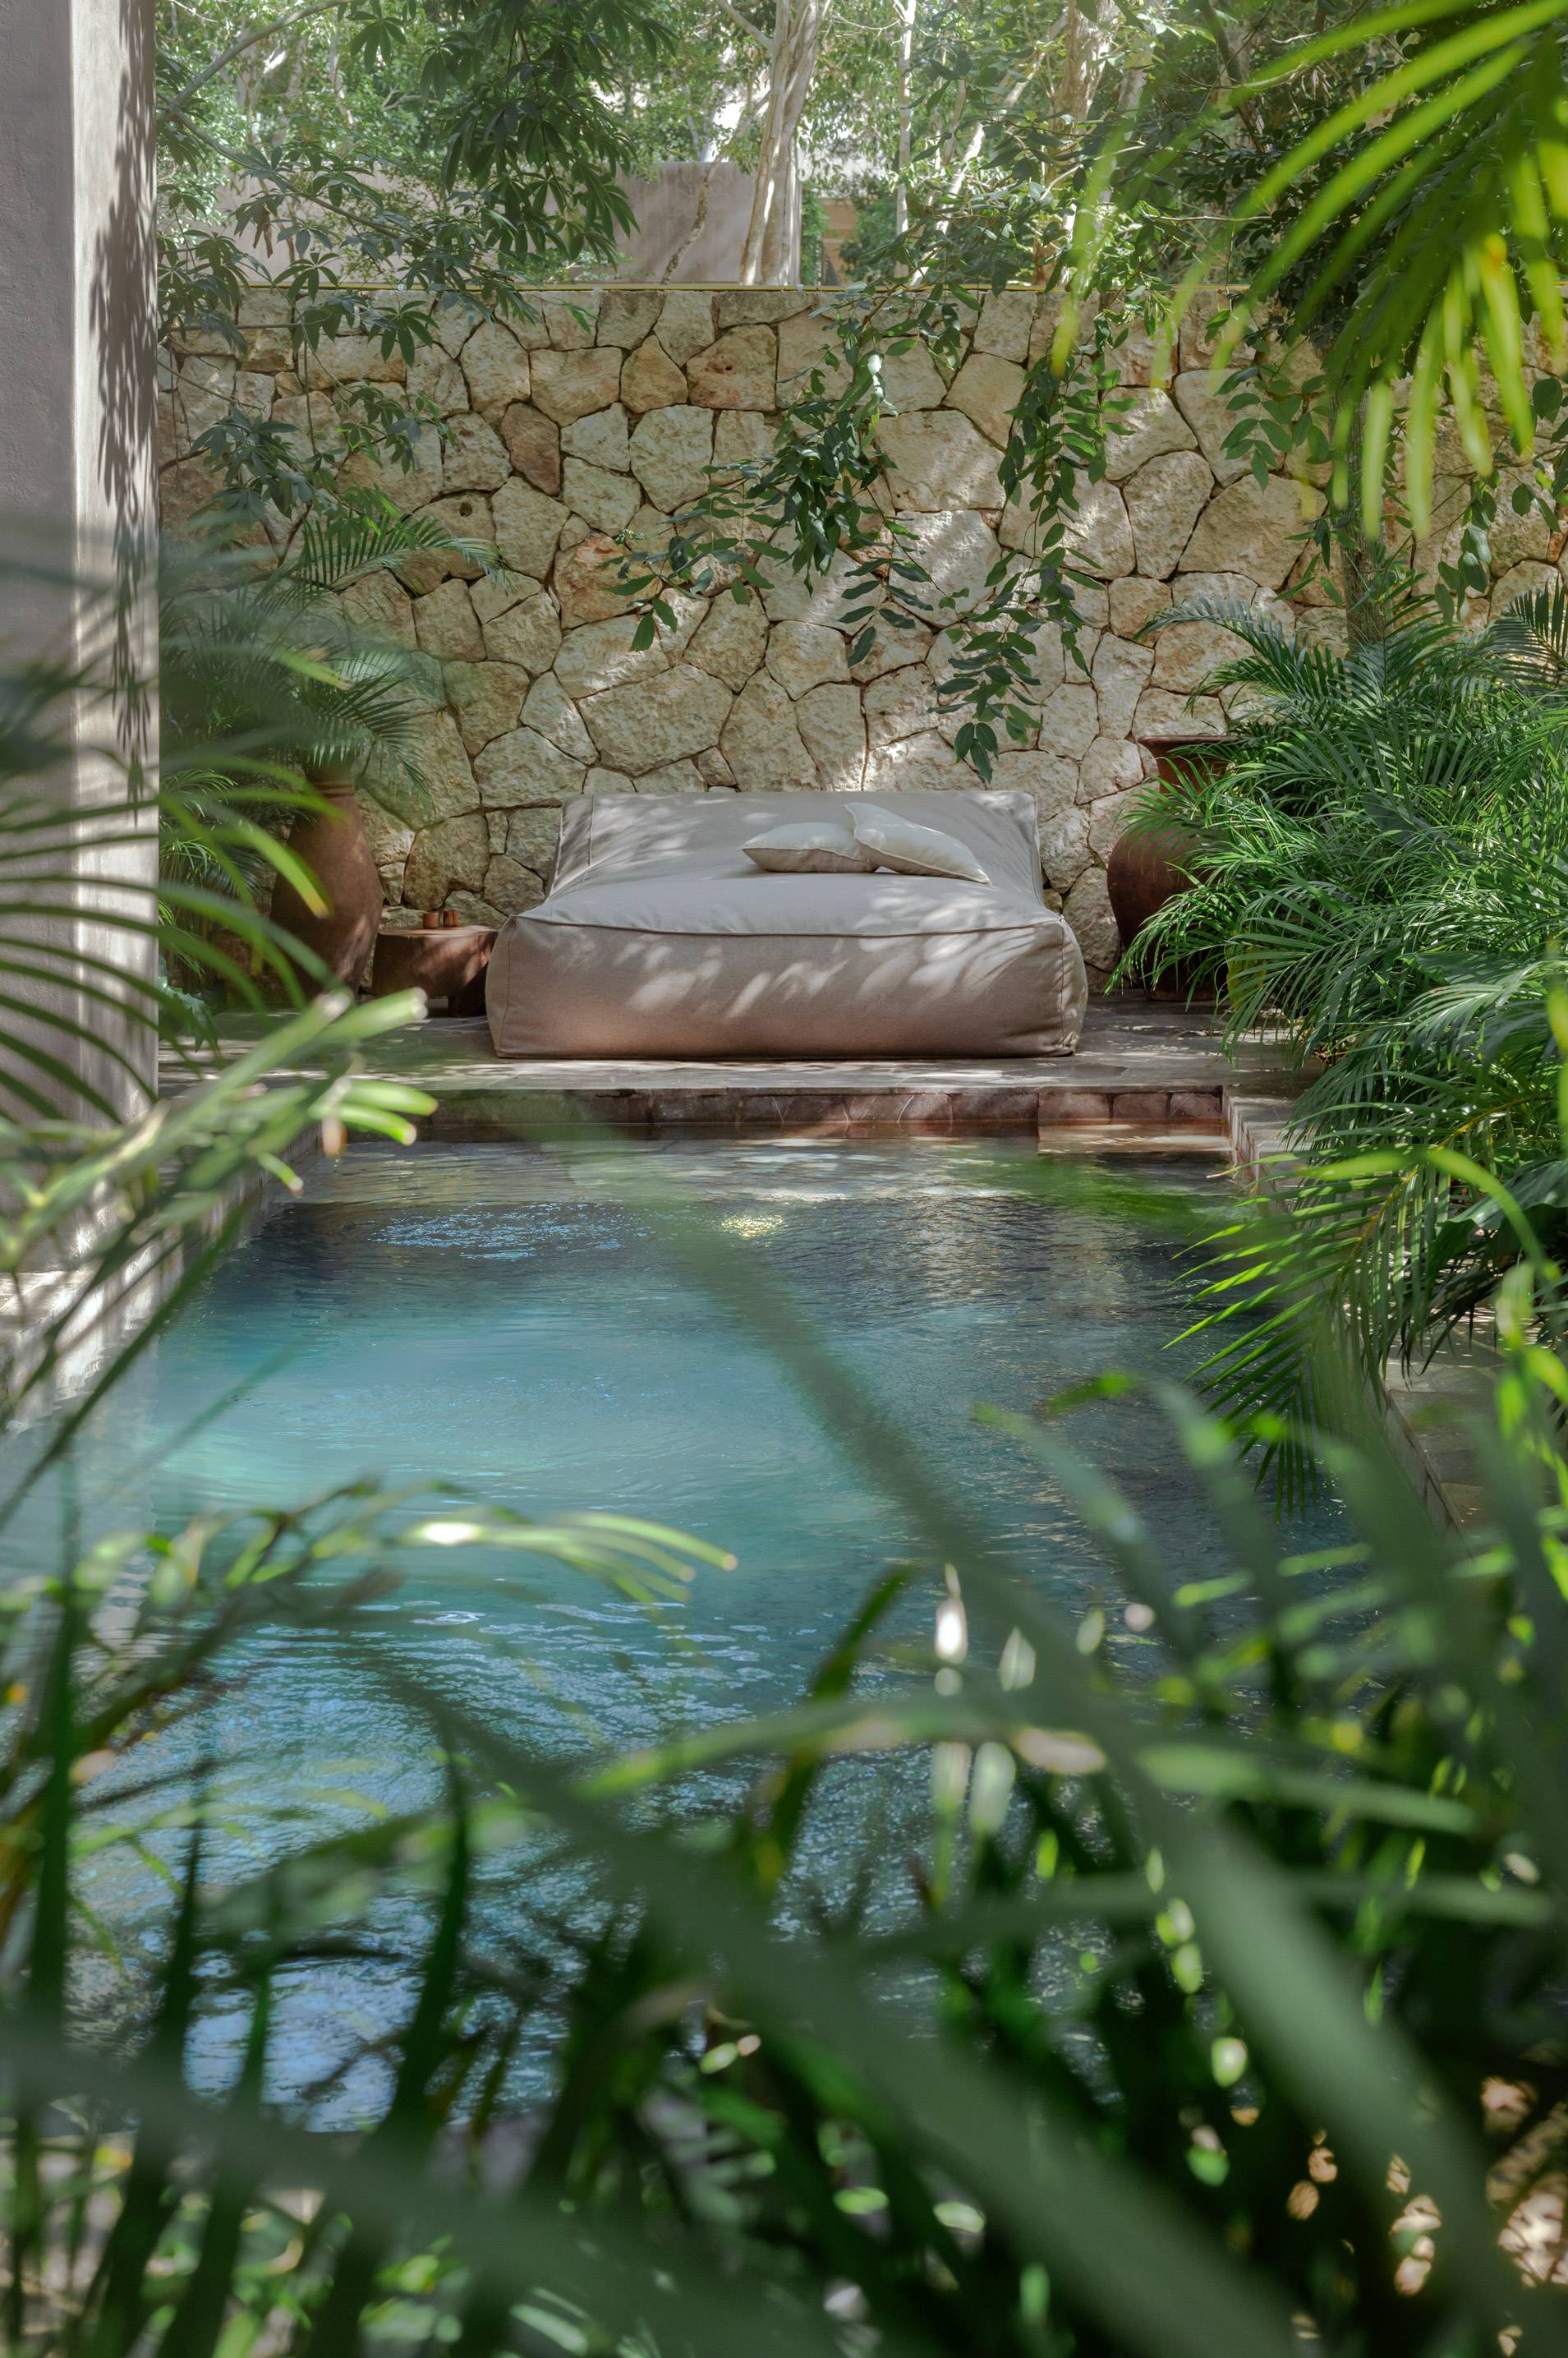 Inspiring Lifestyle Within A Sustainable Environment | Tulum, Mexico